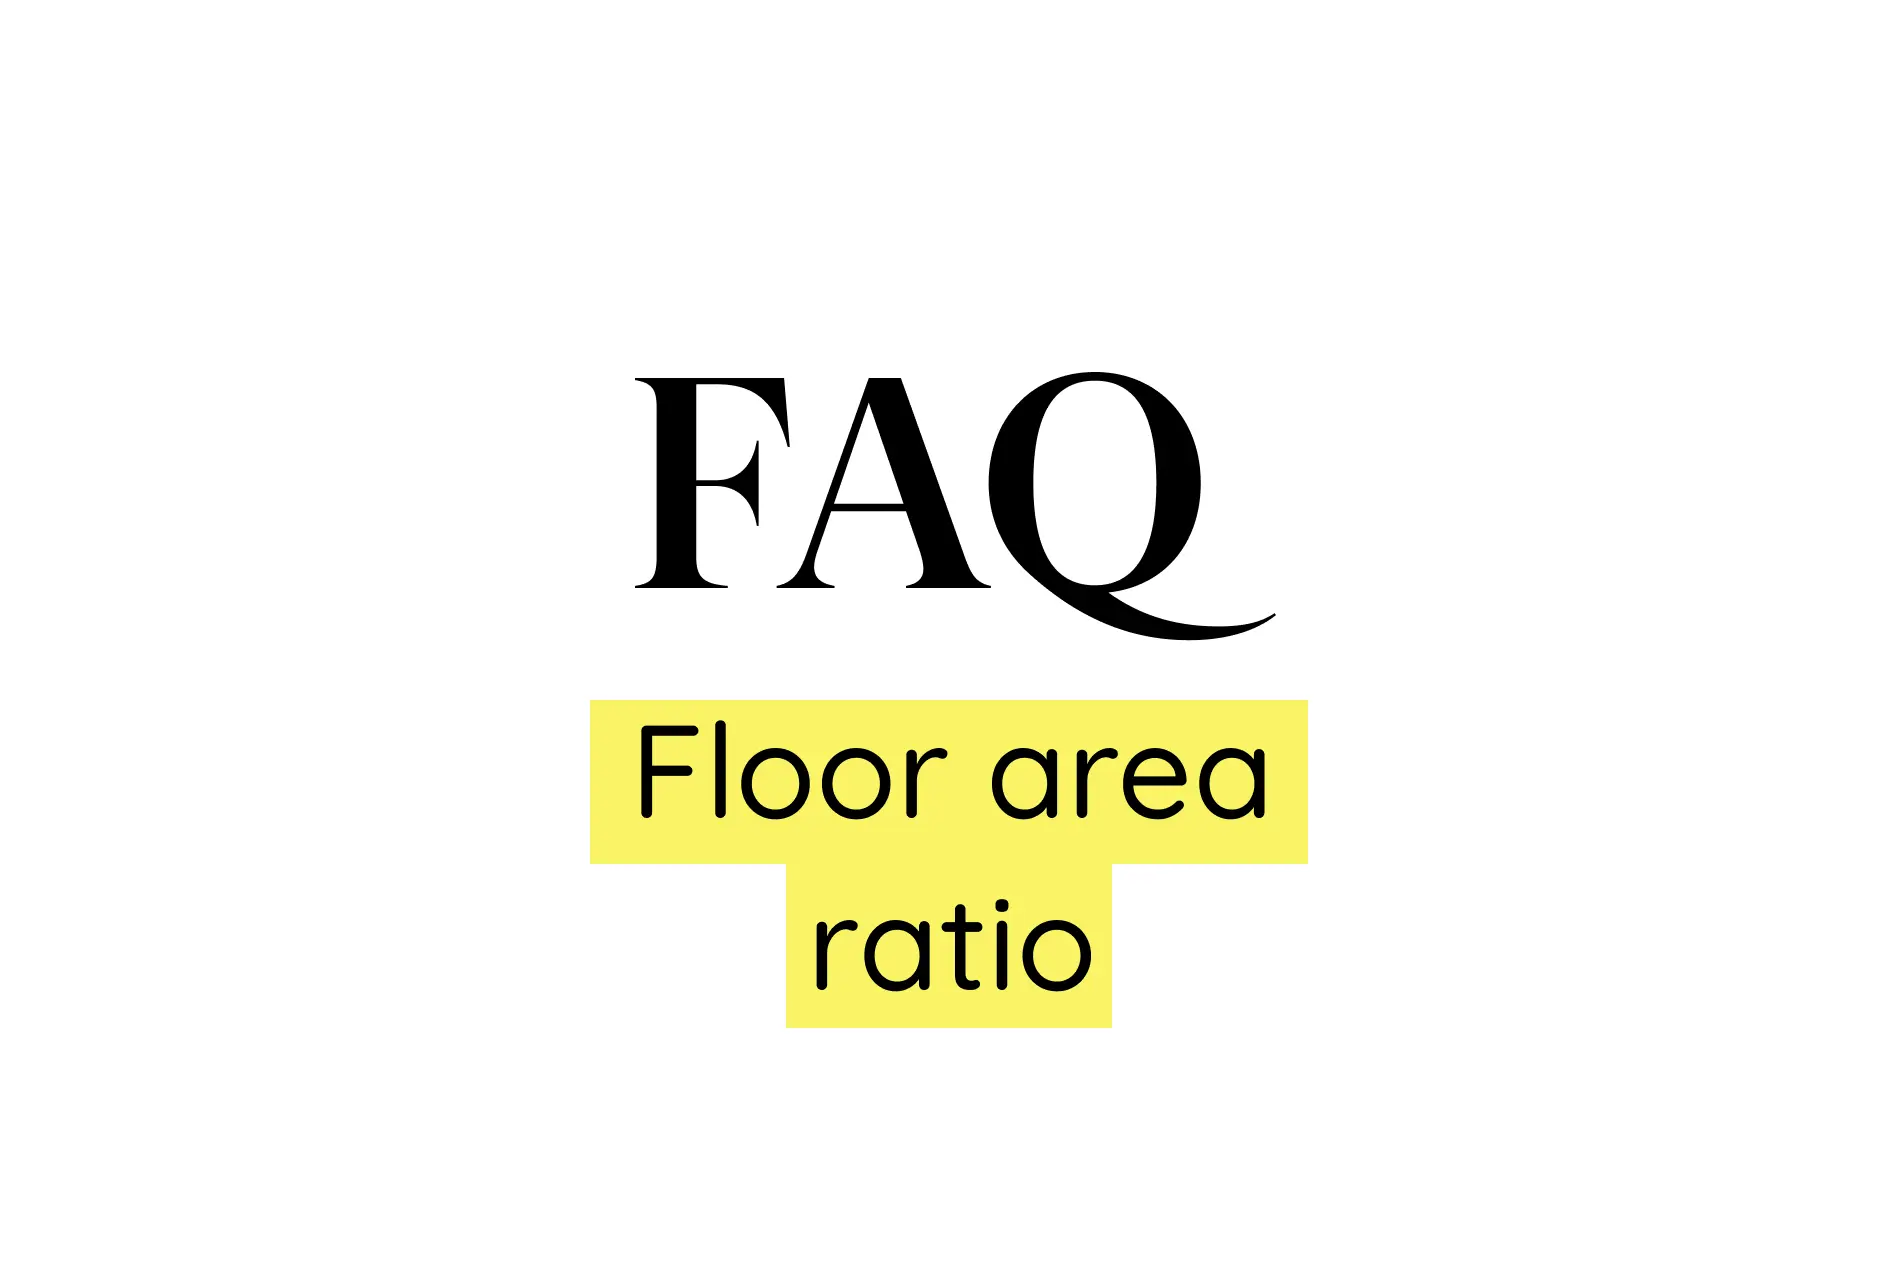 How big could your dream house be? Our FAQ on the floor area ratio